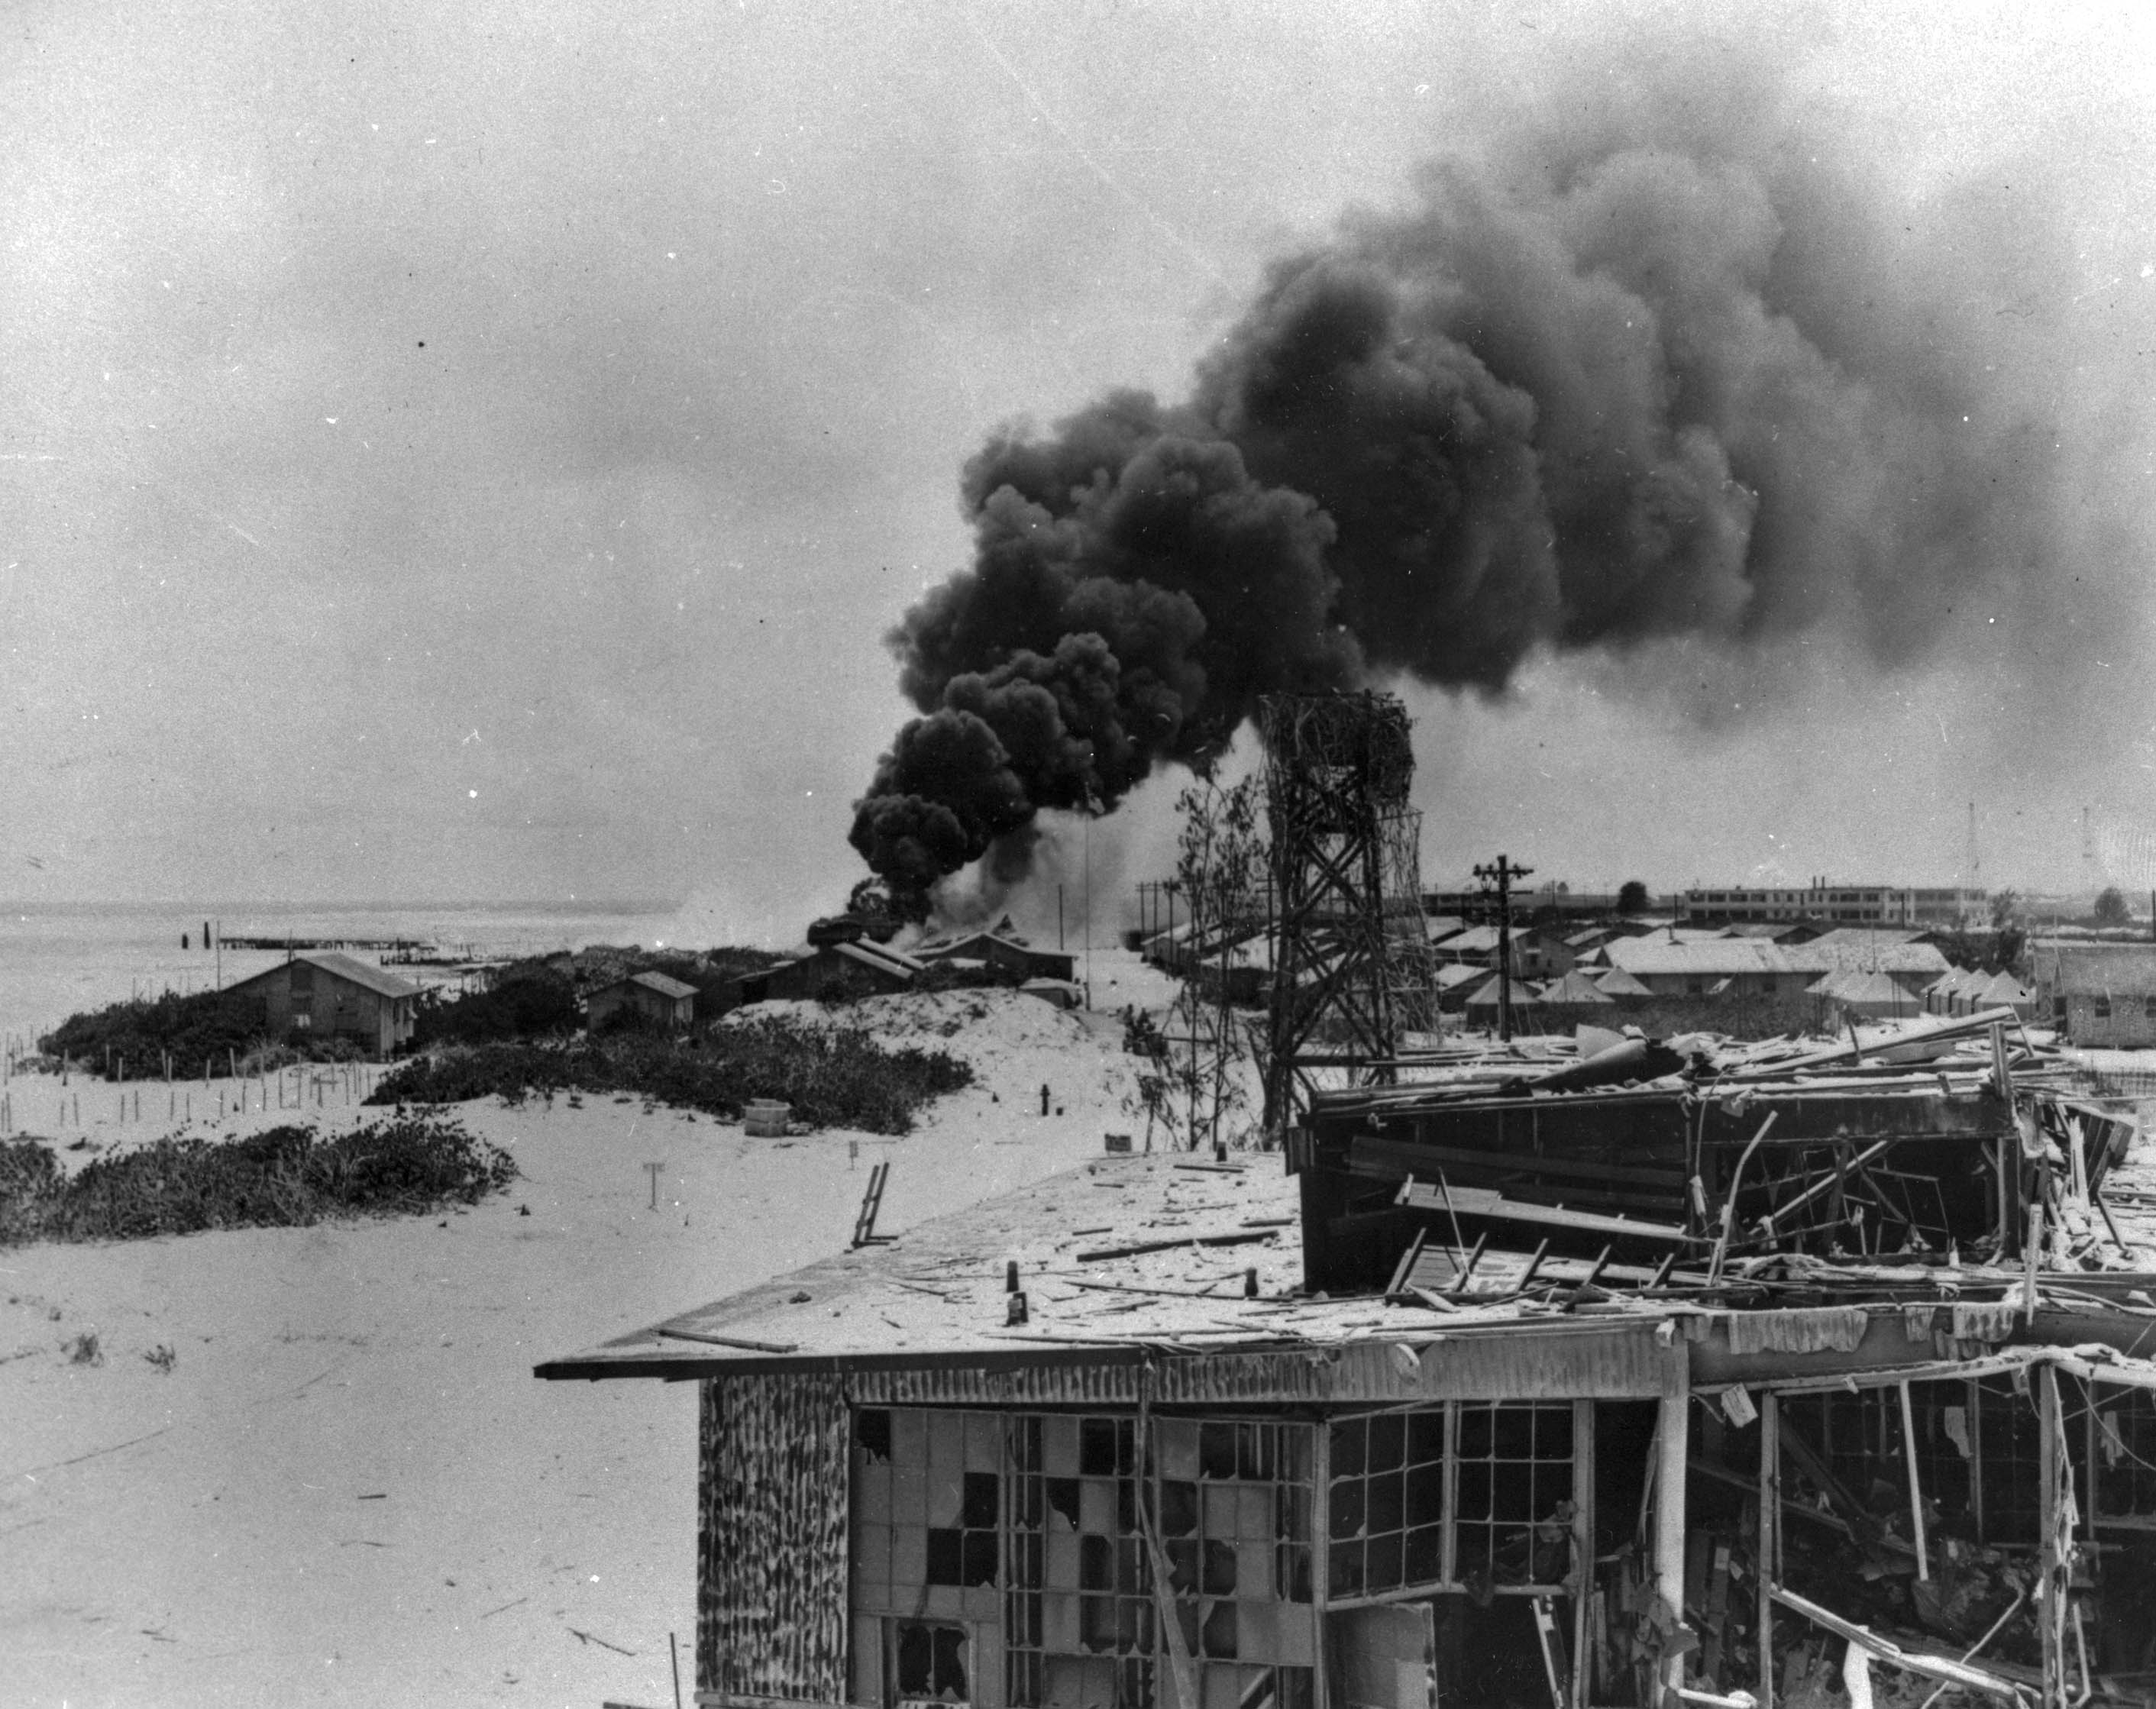 Fires and damaged buildings at Midway from Japanese bombardment during the opening of the Battle of Midway, 4 Jun 1942.